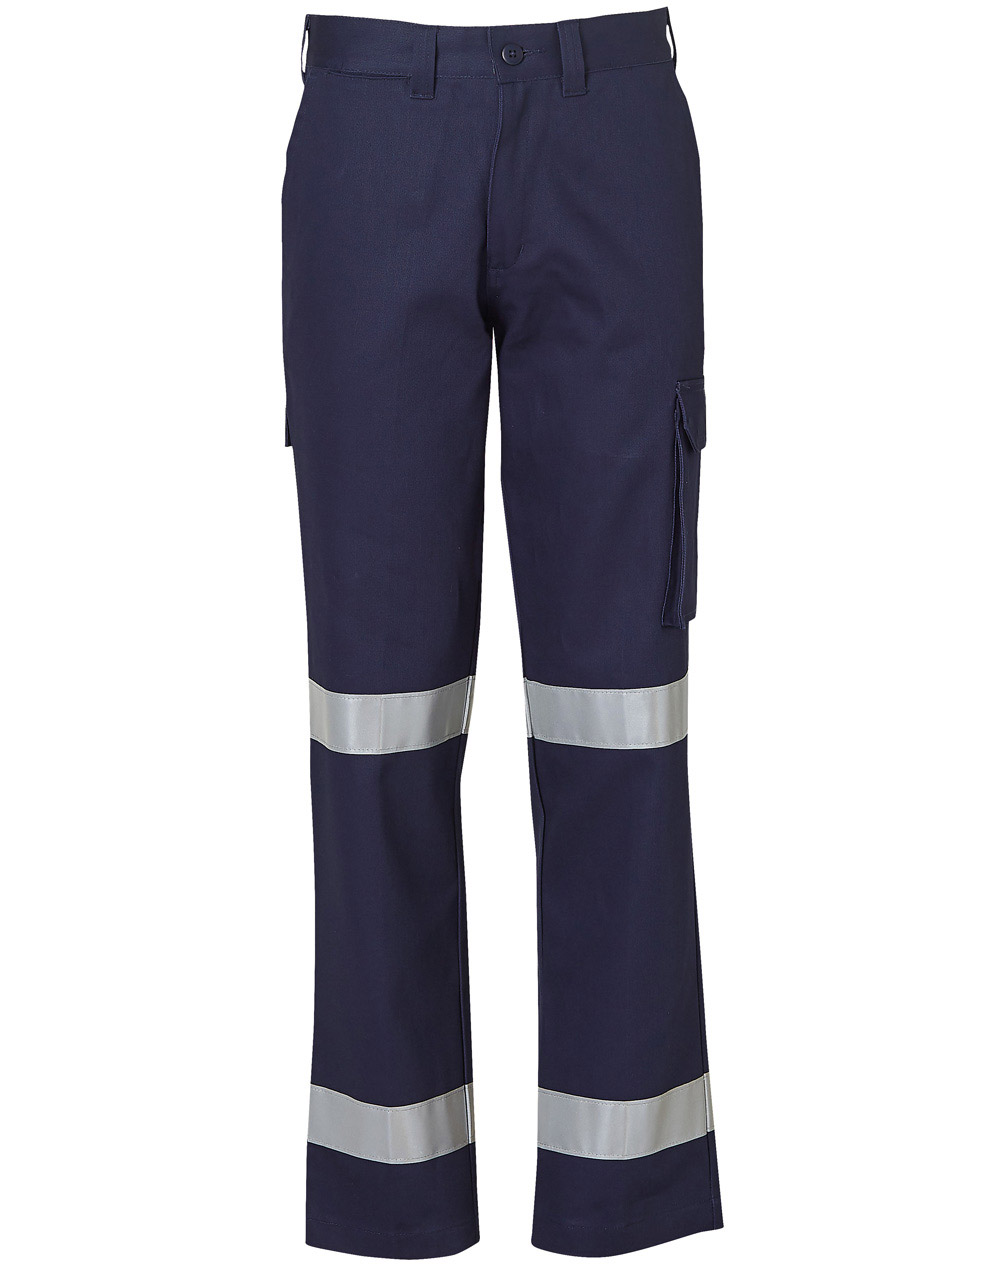 WP15HV LADIES’ HEAVY COTTON DRILL CARGO PANTS WITH BIOMOTION 3M TAPES